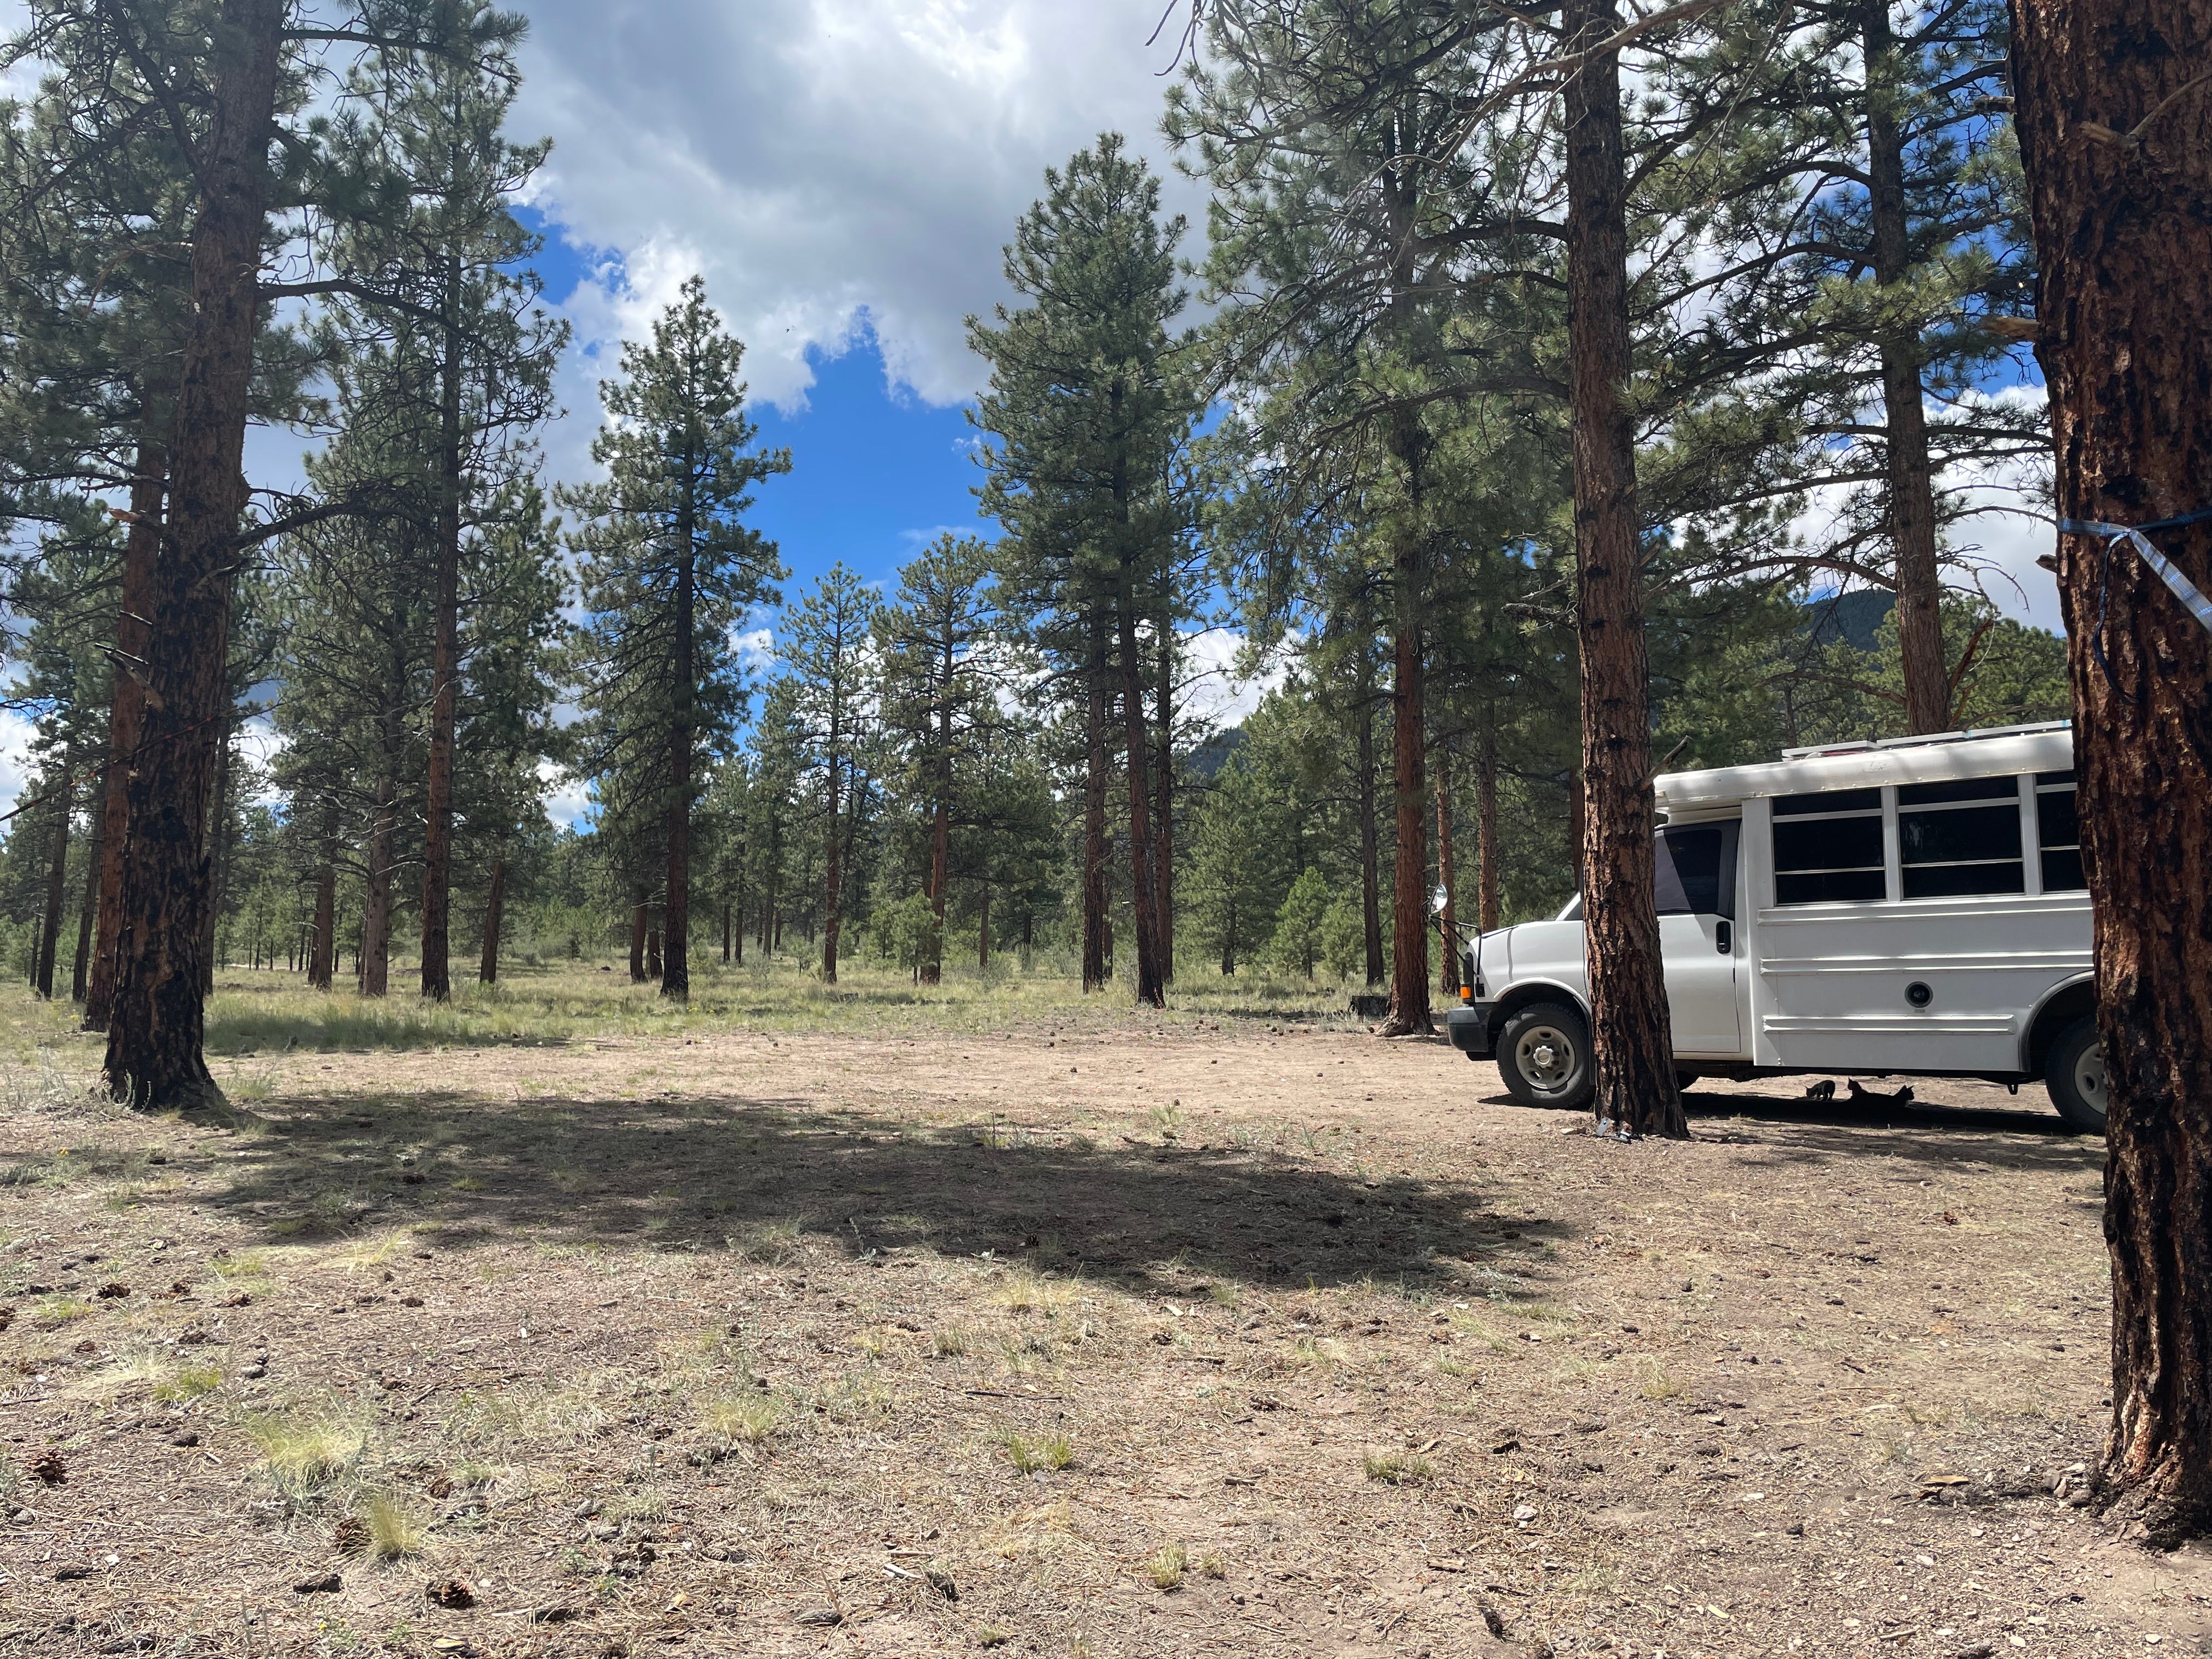 Camper submitted image from Raspberry Gulch Dispersed Site - 1